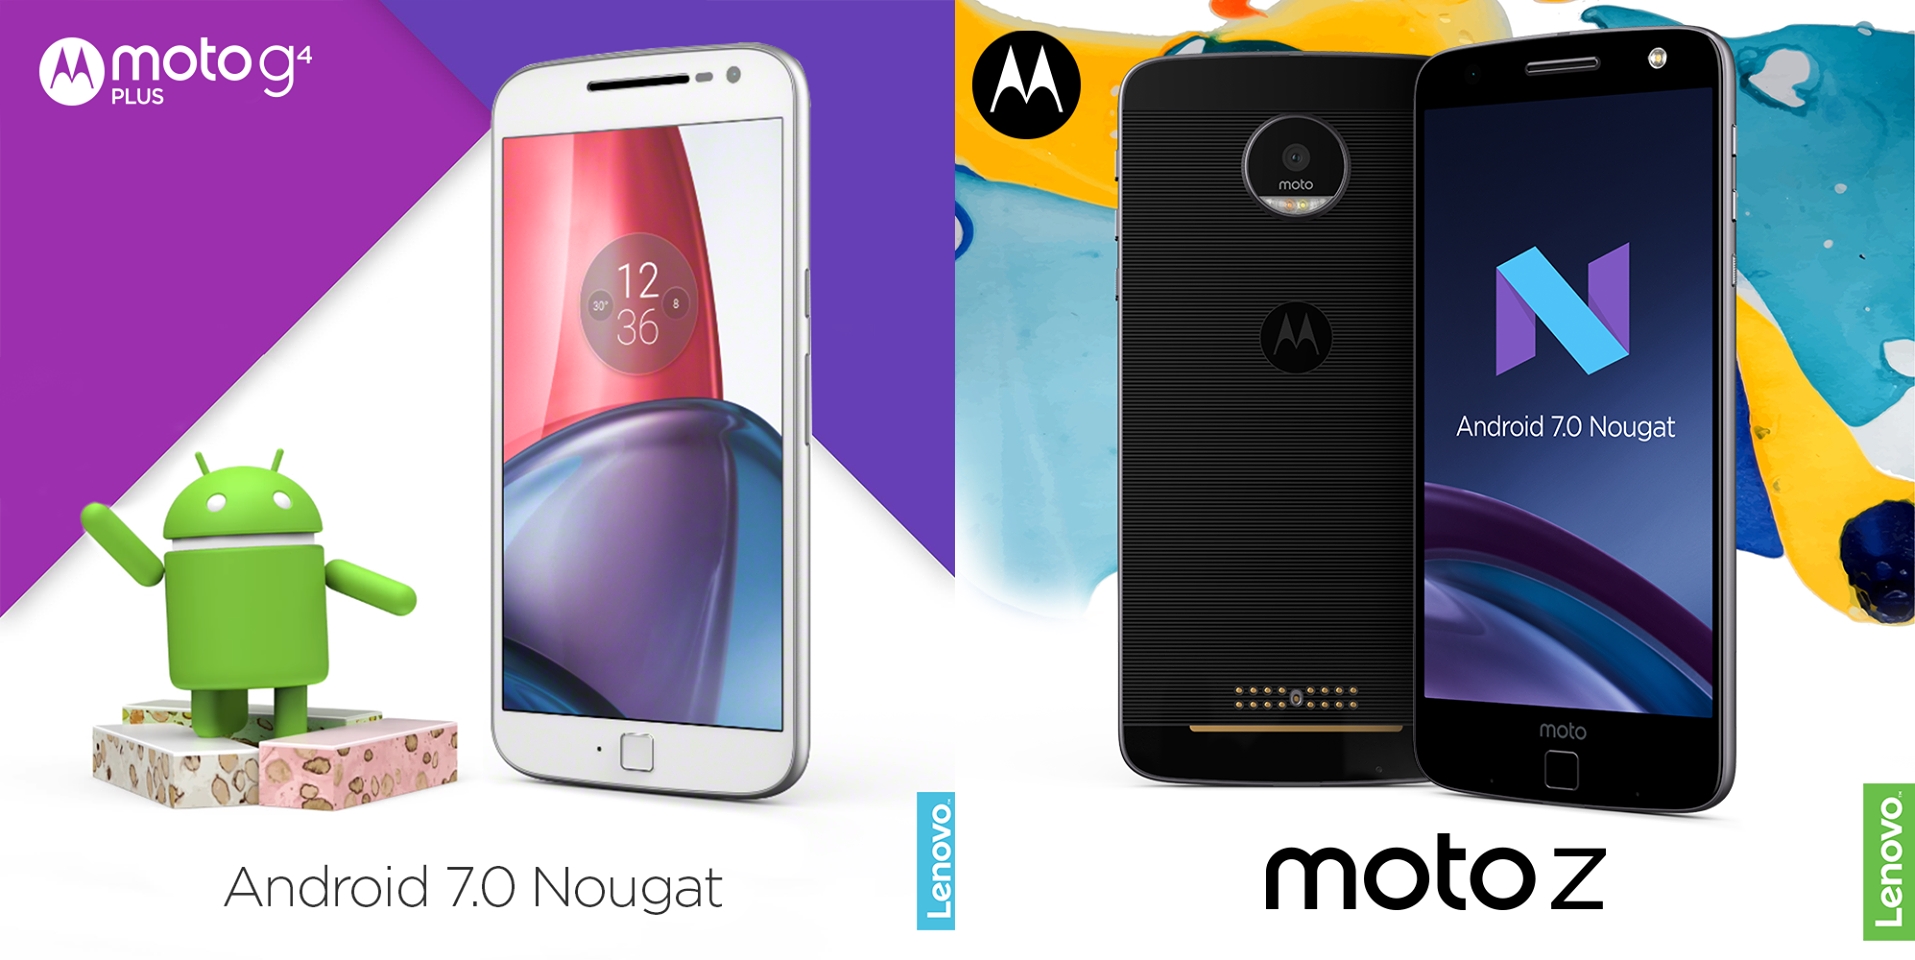 moto g4 plus moto z to android 7 | Android 7.0 Nougat | [Official] Moto Z และ Moto G4 Plus ในไทย!! อัพเดต Android 7.0 Nougat ภายในสัปดาห์นี้